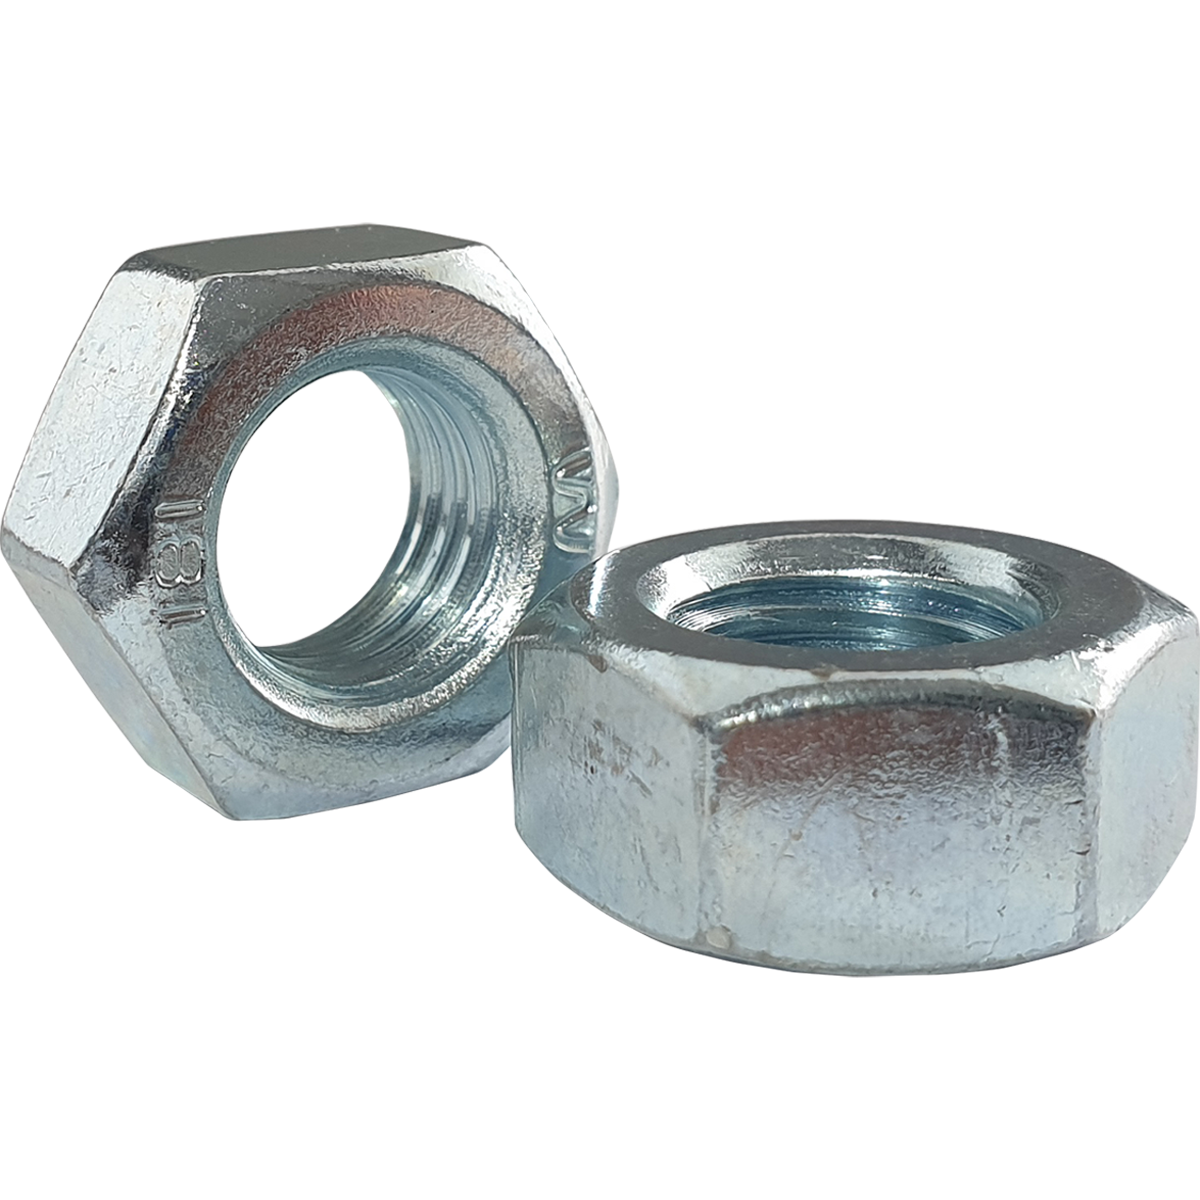 Bright zinc plated hex nuts, also known as full hex nuts, at competitive prices.